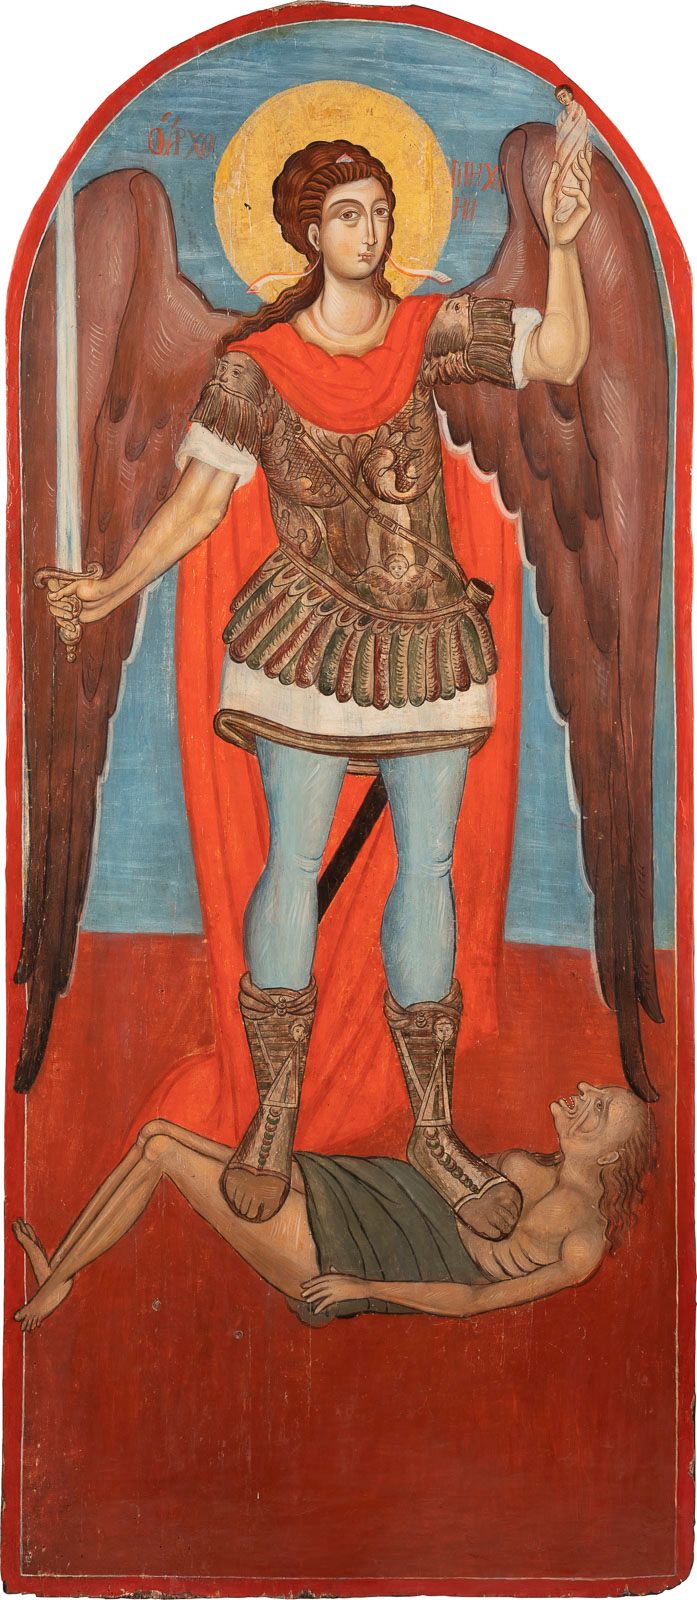 A MONUMENTAL ICON SHOWING THE ARCHANGEL MICHAEL AS PSYCHOPO ICONO MONUMENTAL QUE&hellip;